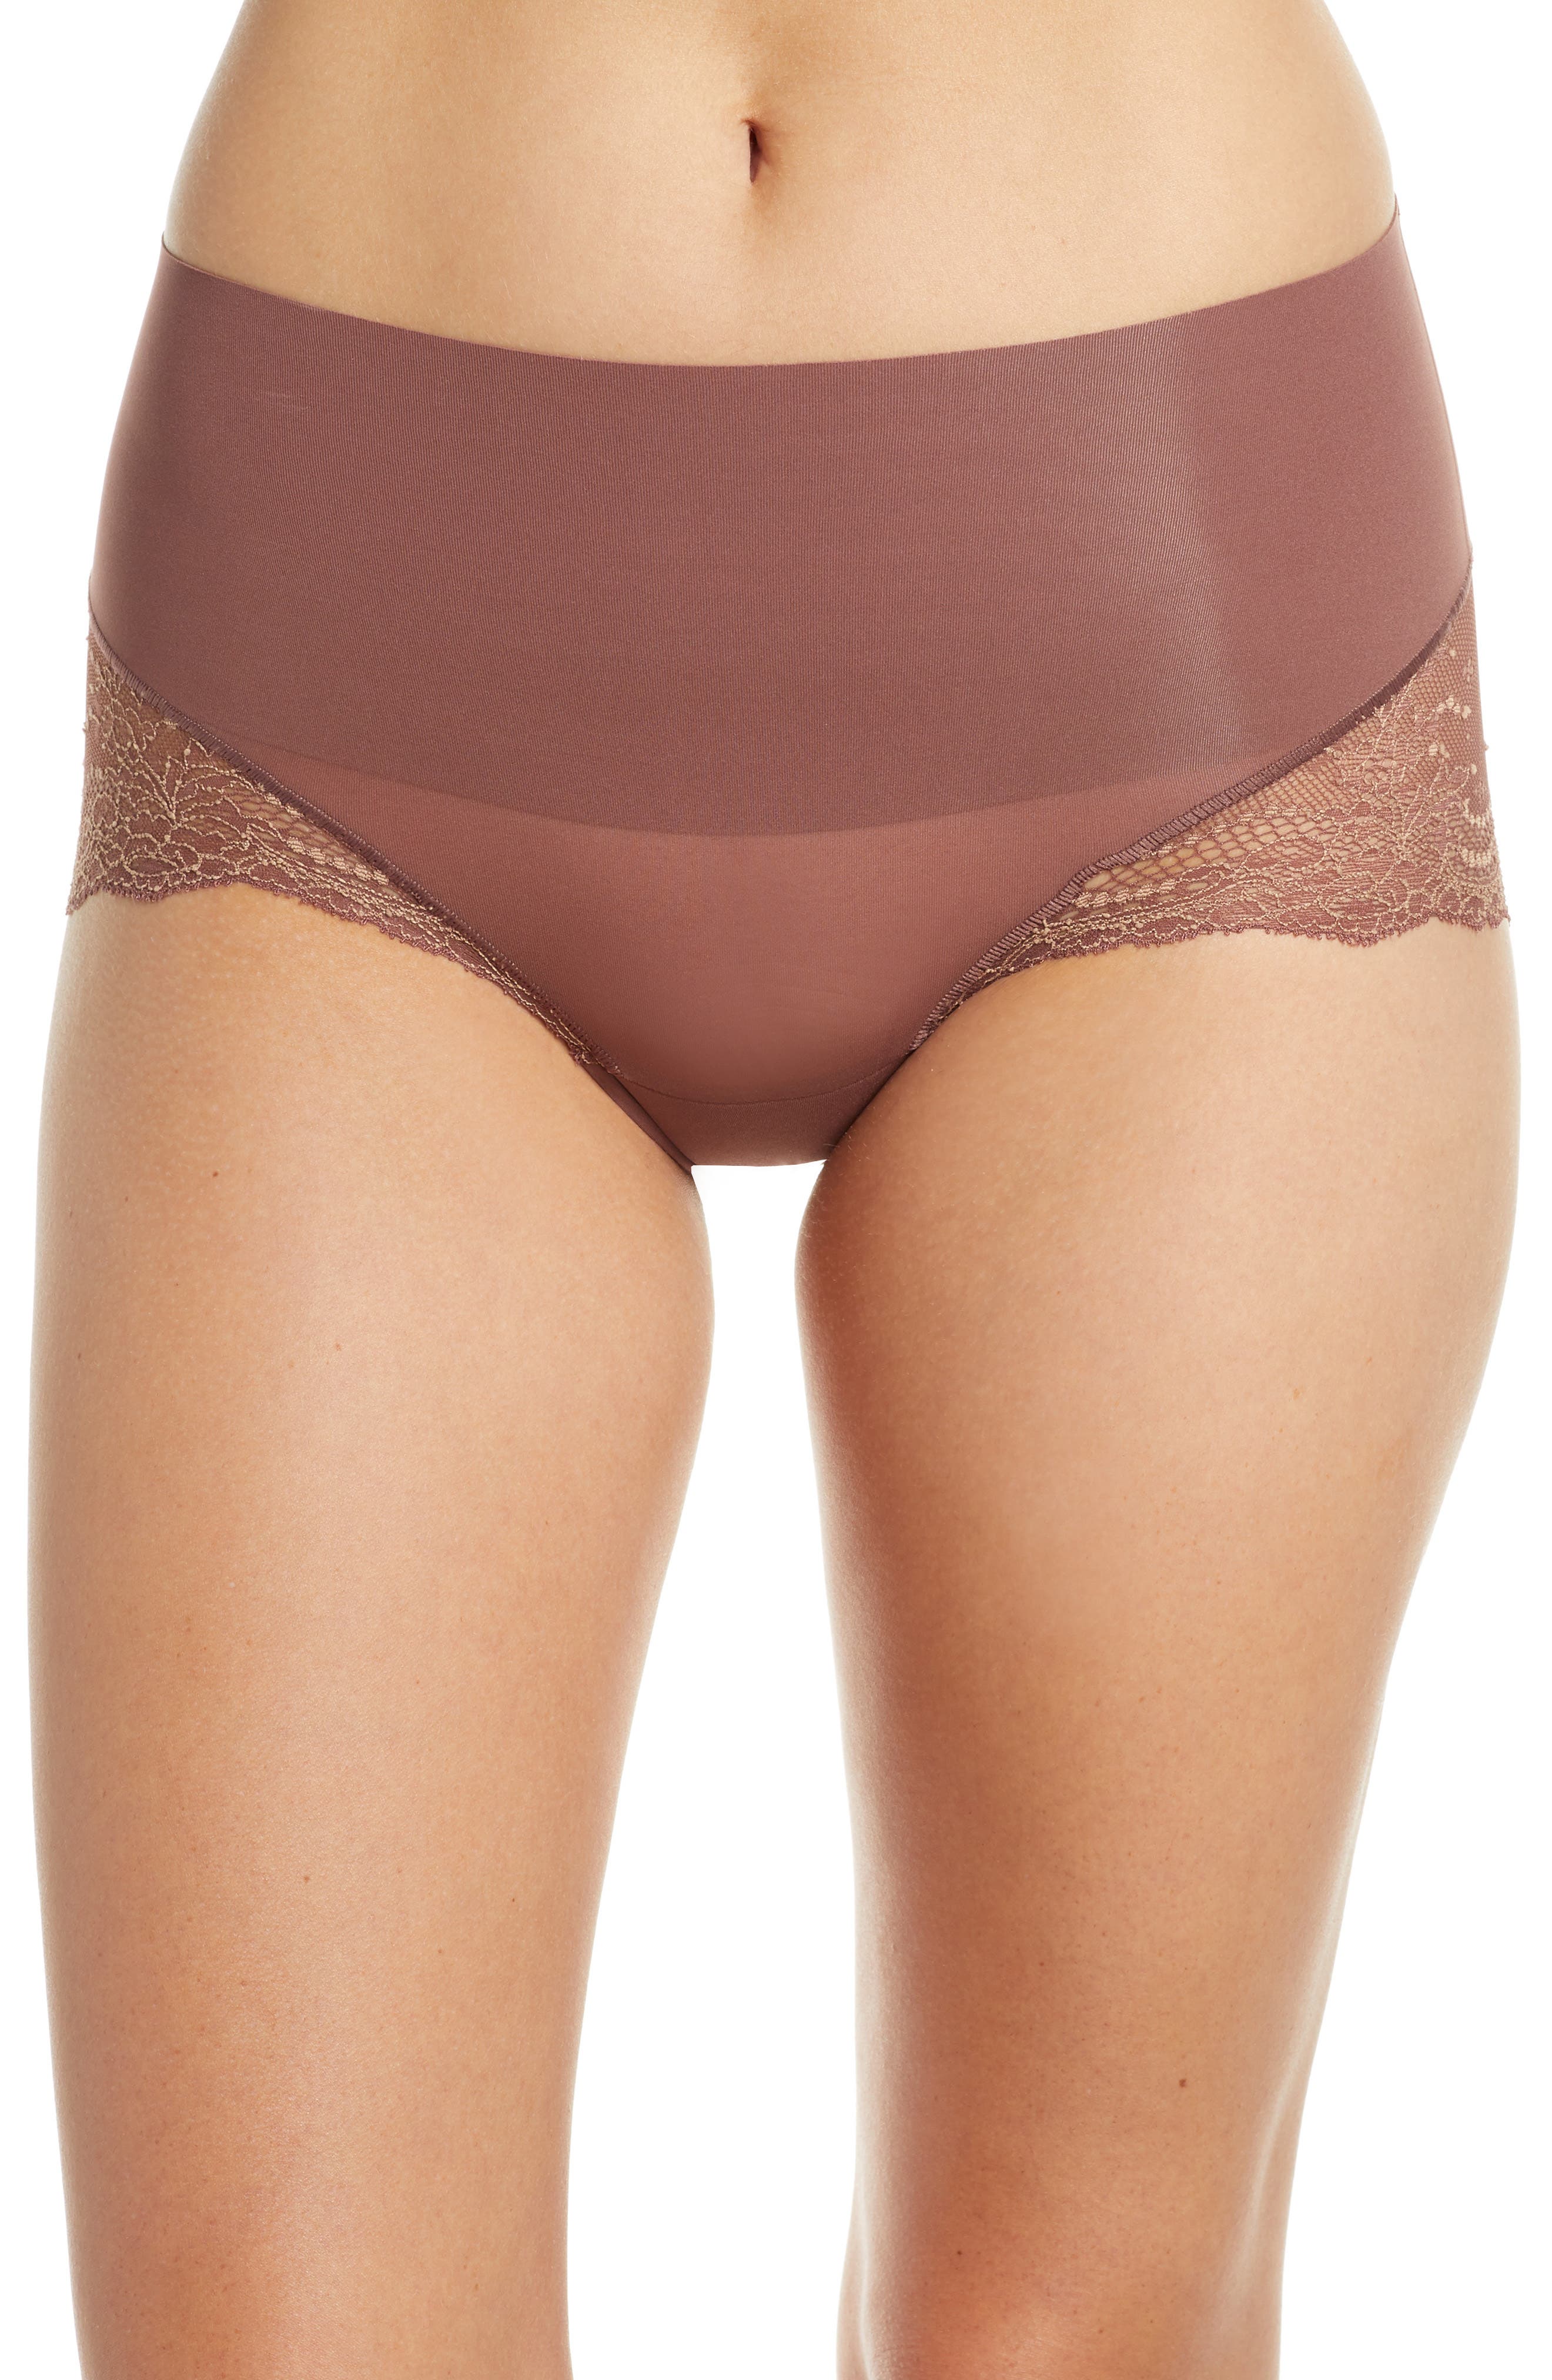 SPANX Lace Hi-Hipster in Soft Nude